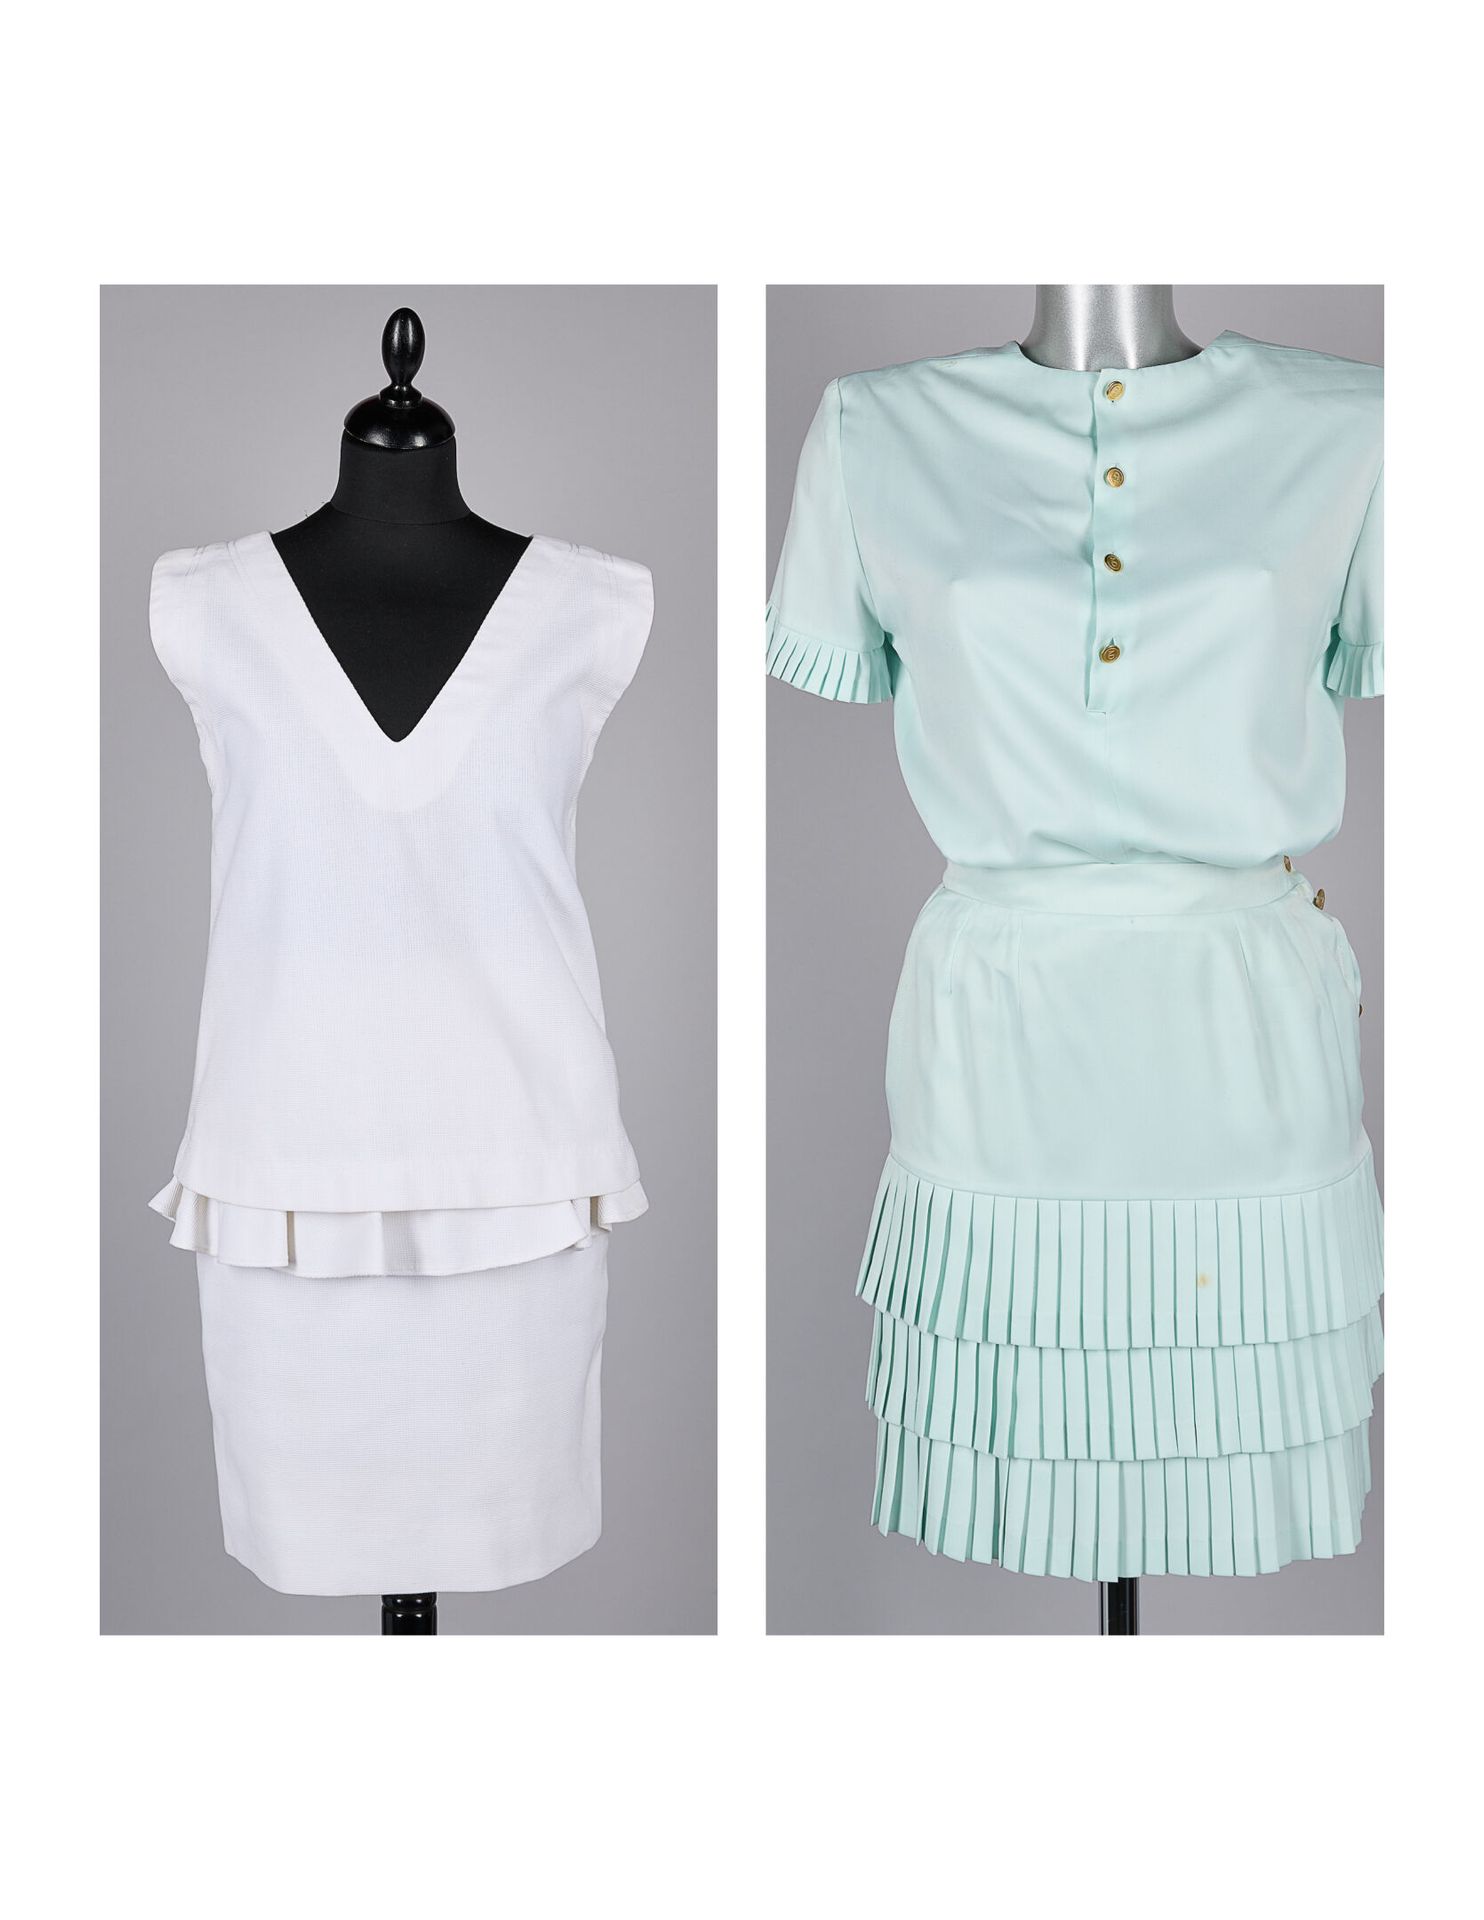 MAUD DEFOSSEZ, ANONYME Pale blue polyester outfit with golden buttons: bodice an&hellip;